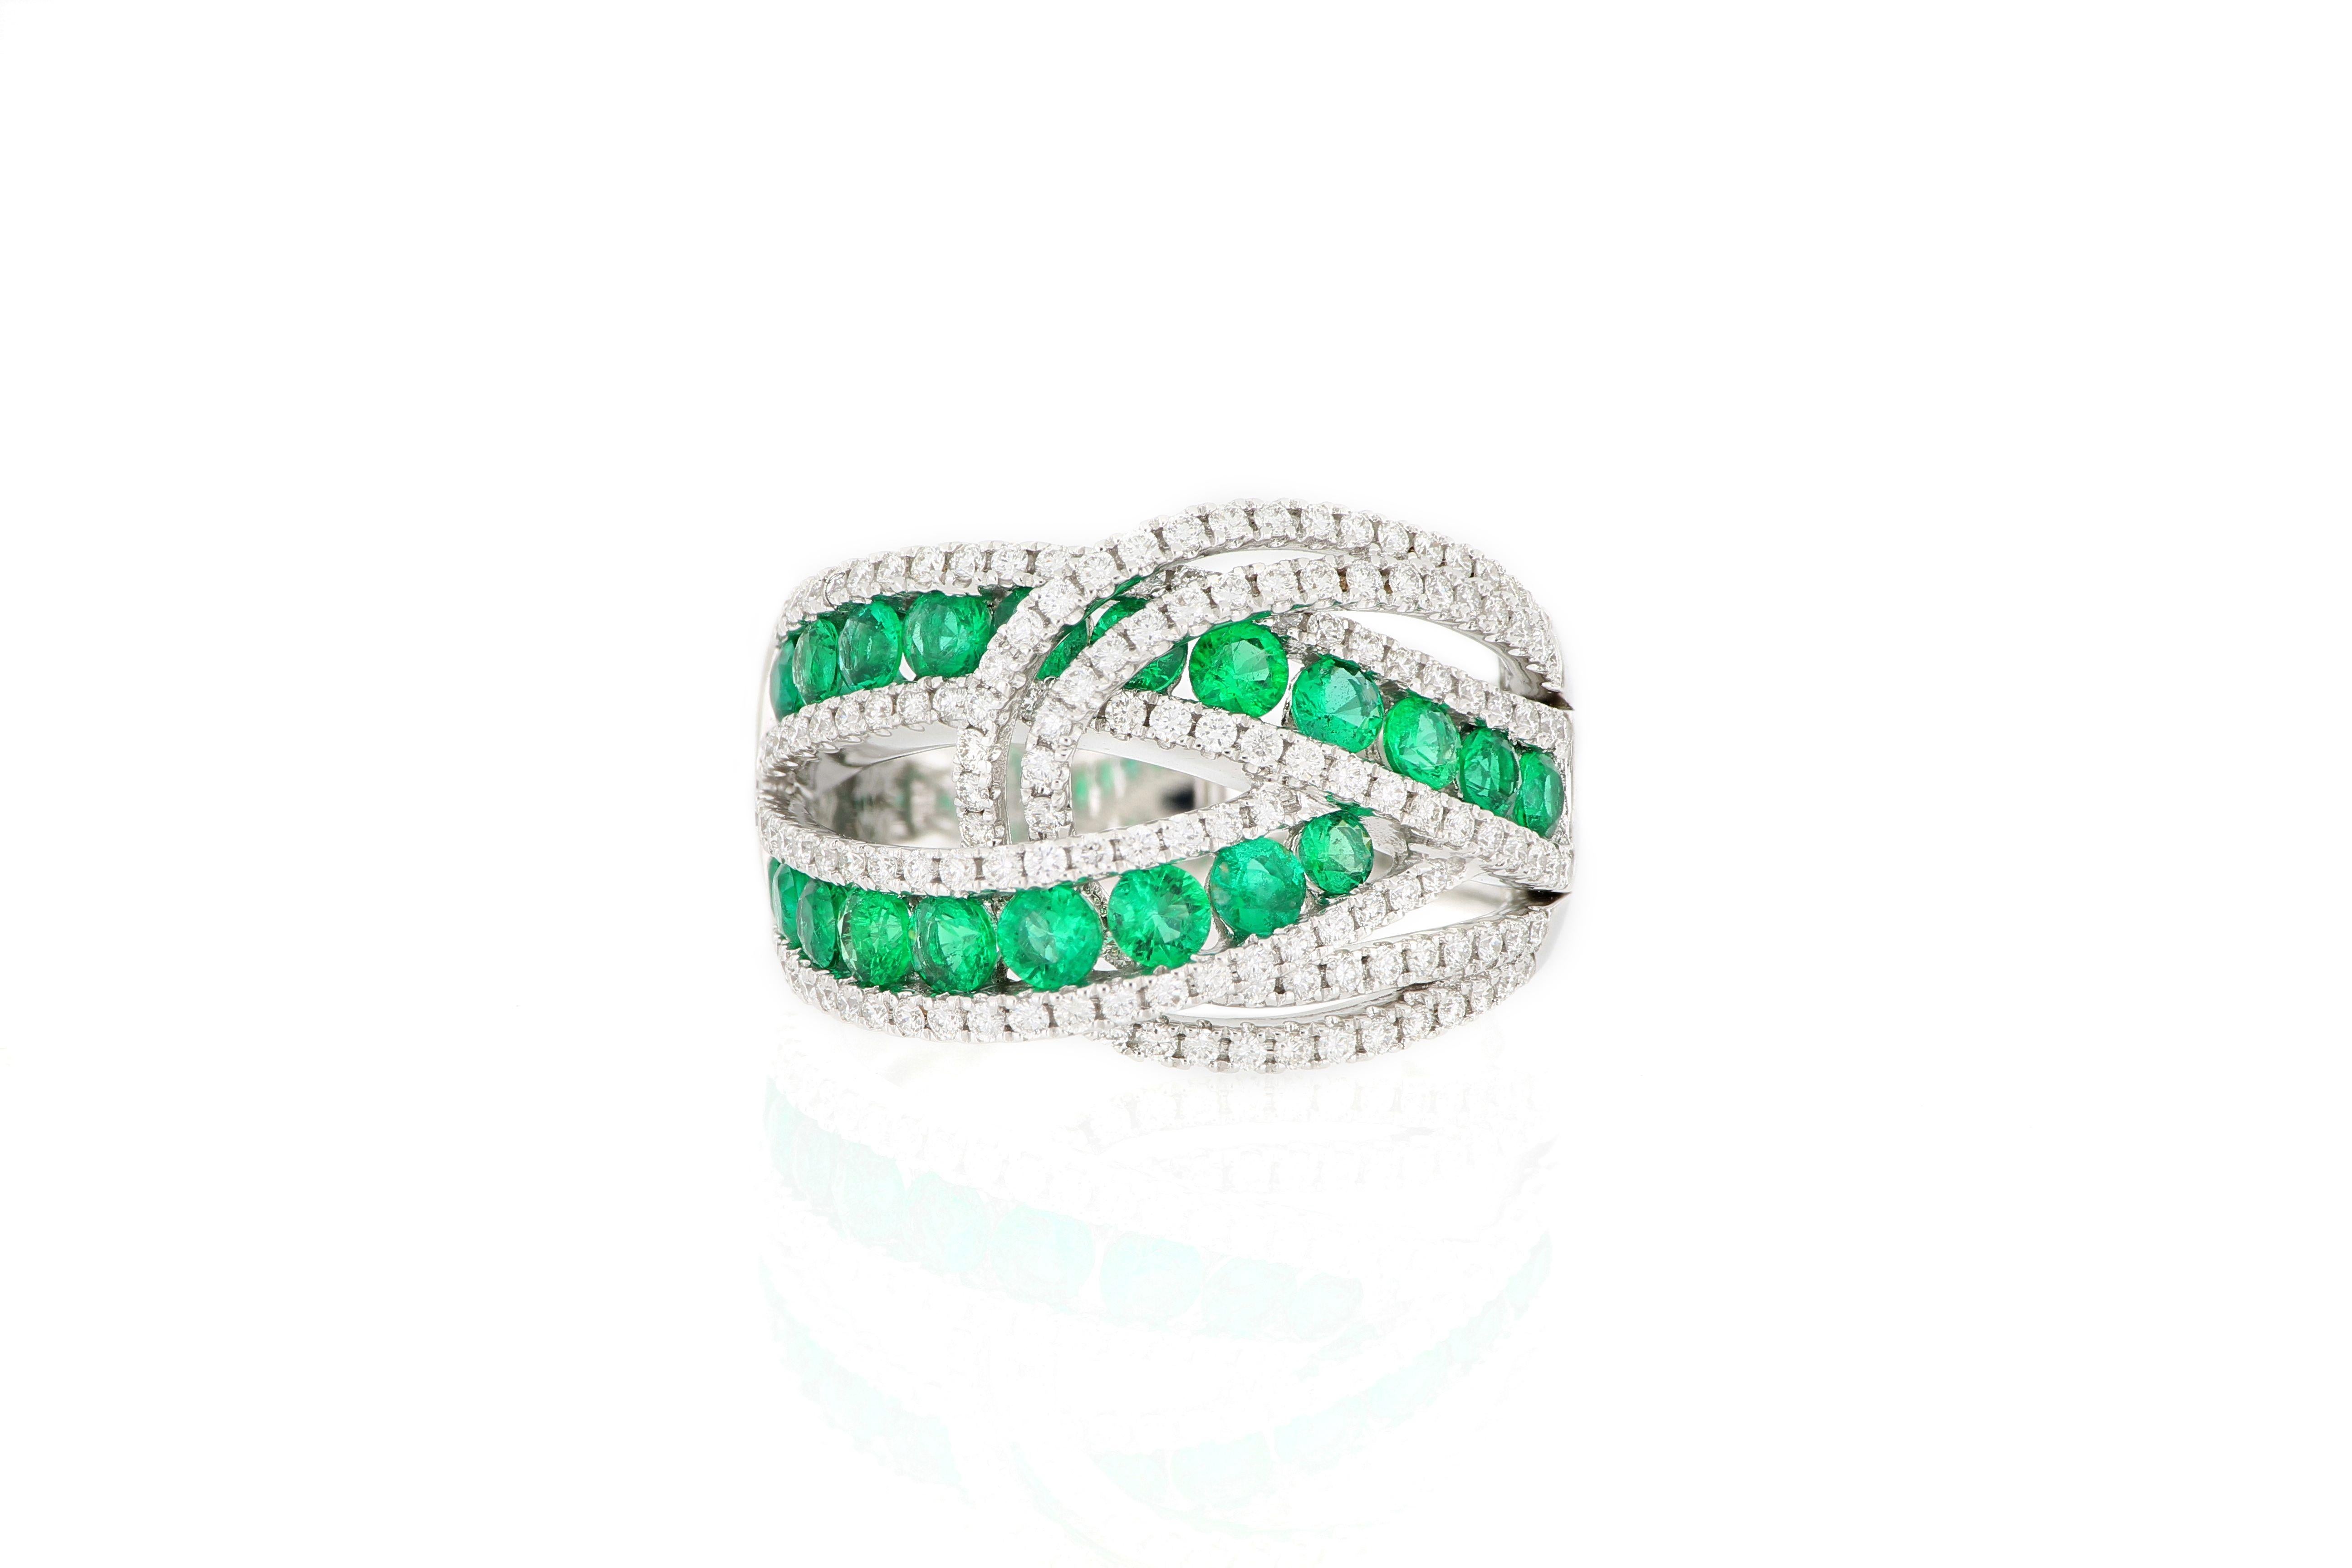 This dramatic and fun cocktail ring , set with bright green emeralds from Columbia,  totaling 1.16 carats, decorated with brilliant-cut diamonds weighing 0.73 carats, mounted in 18 karat white gold.
O’Che 1867 is renowned for its high jewellery